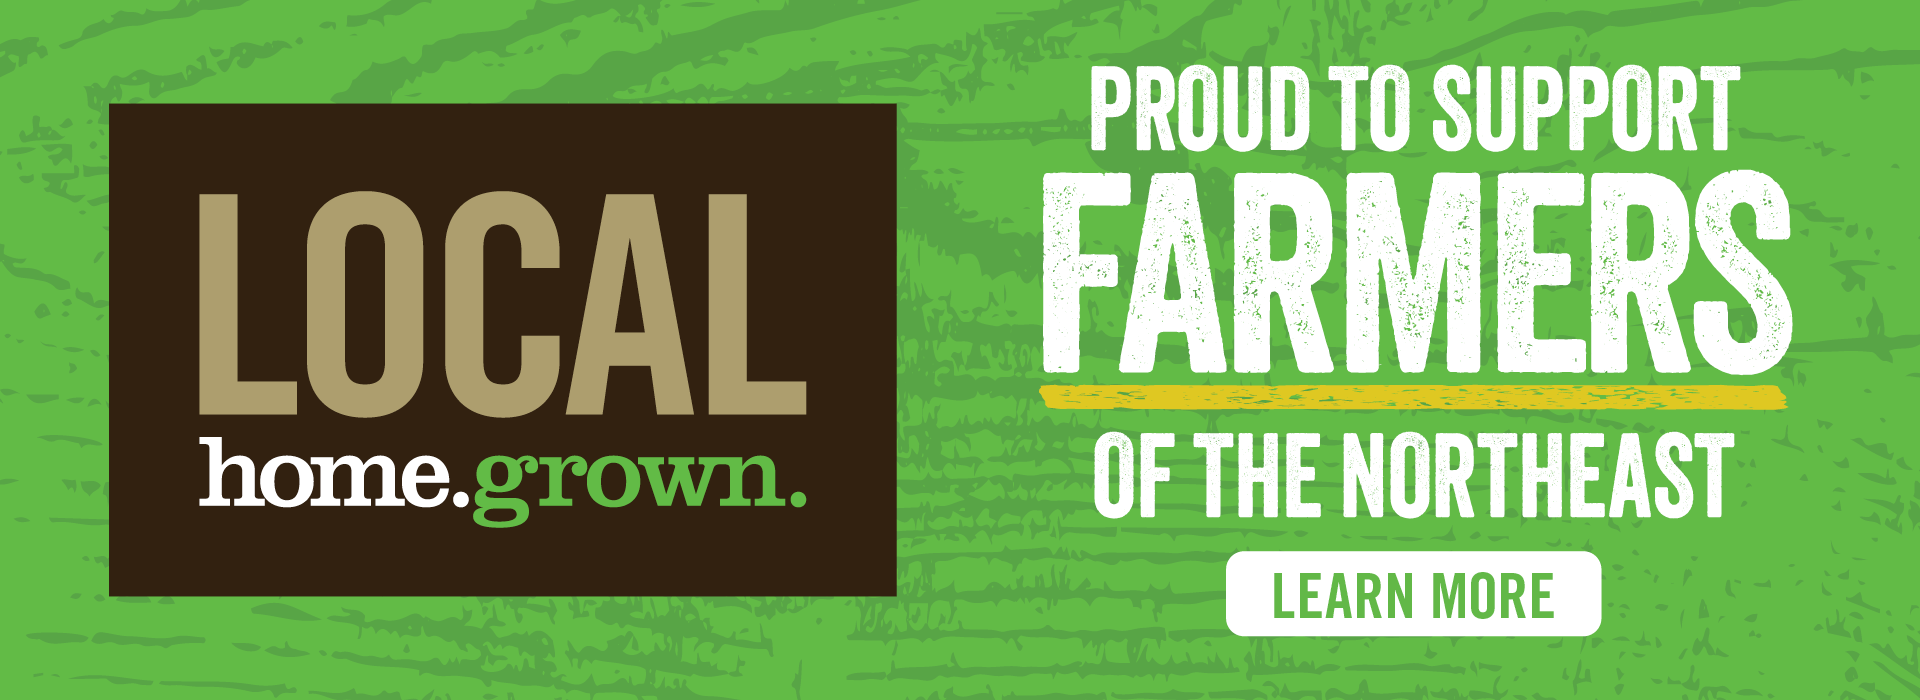 Proud to support Farmers of the Northeast